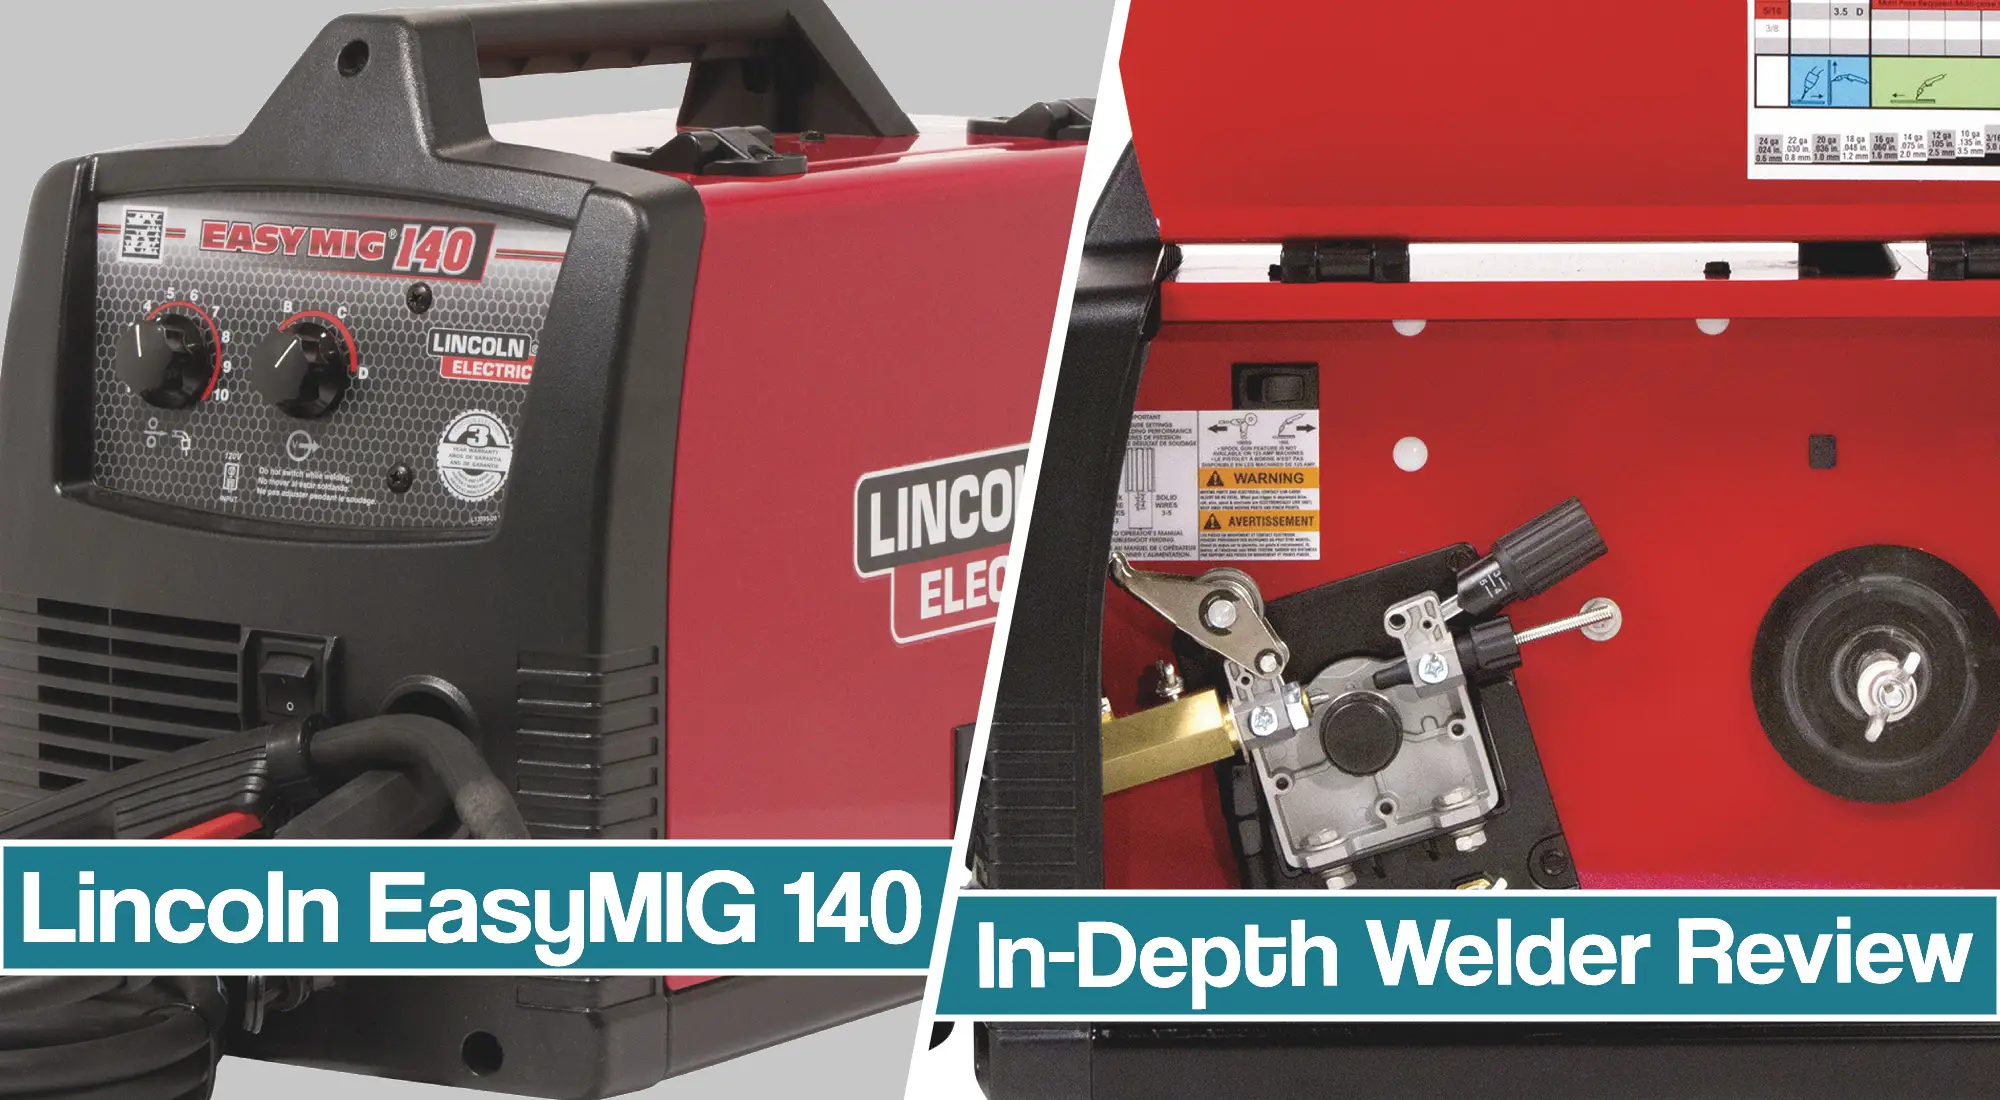 Lincoln EasyMIG 140 Review – Detailed Breakdown of Features, build and Welding Capability